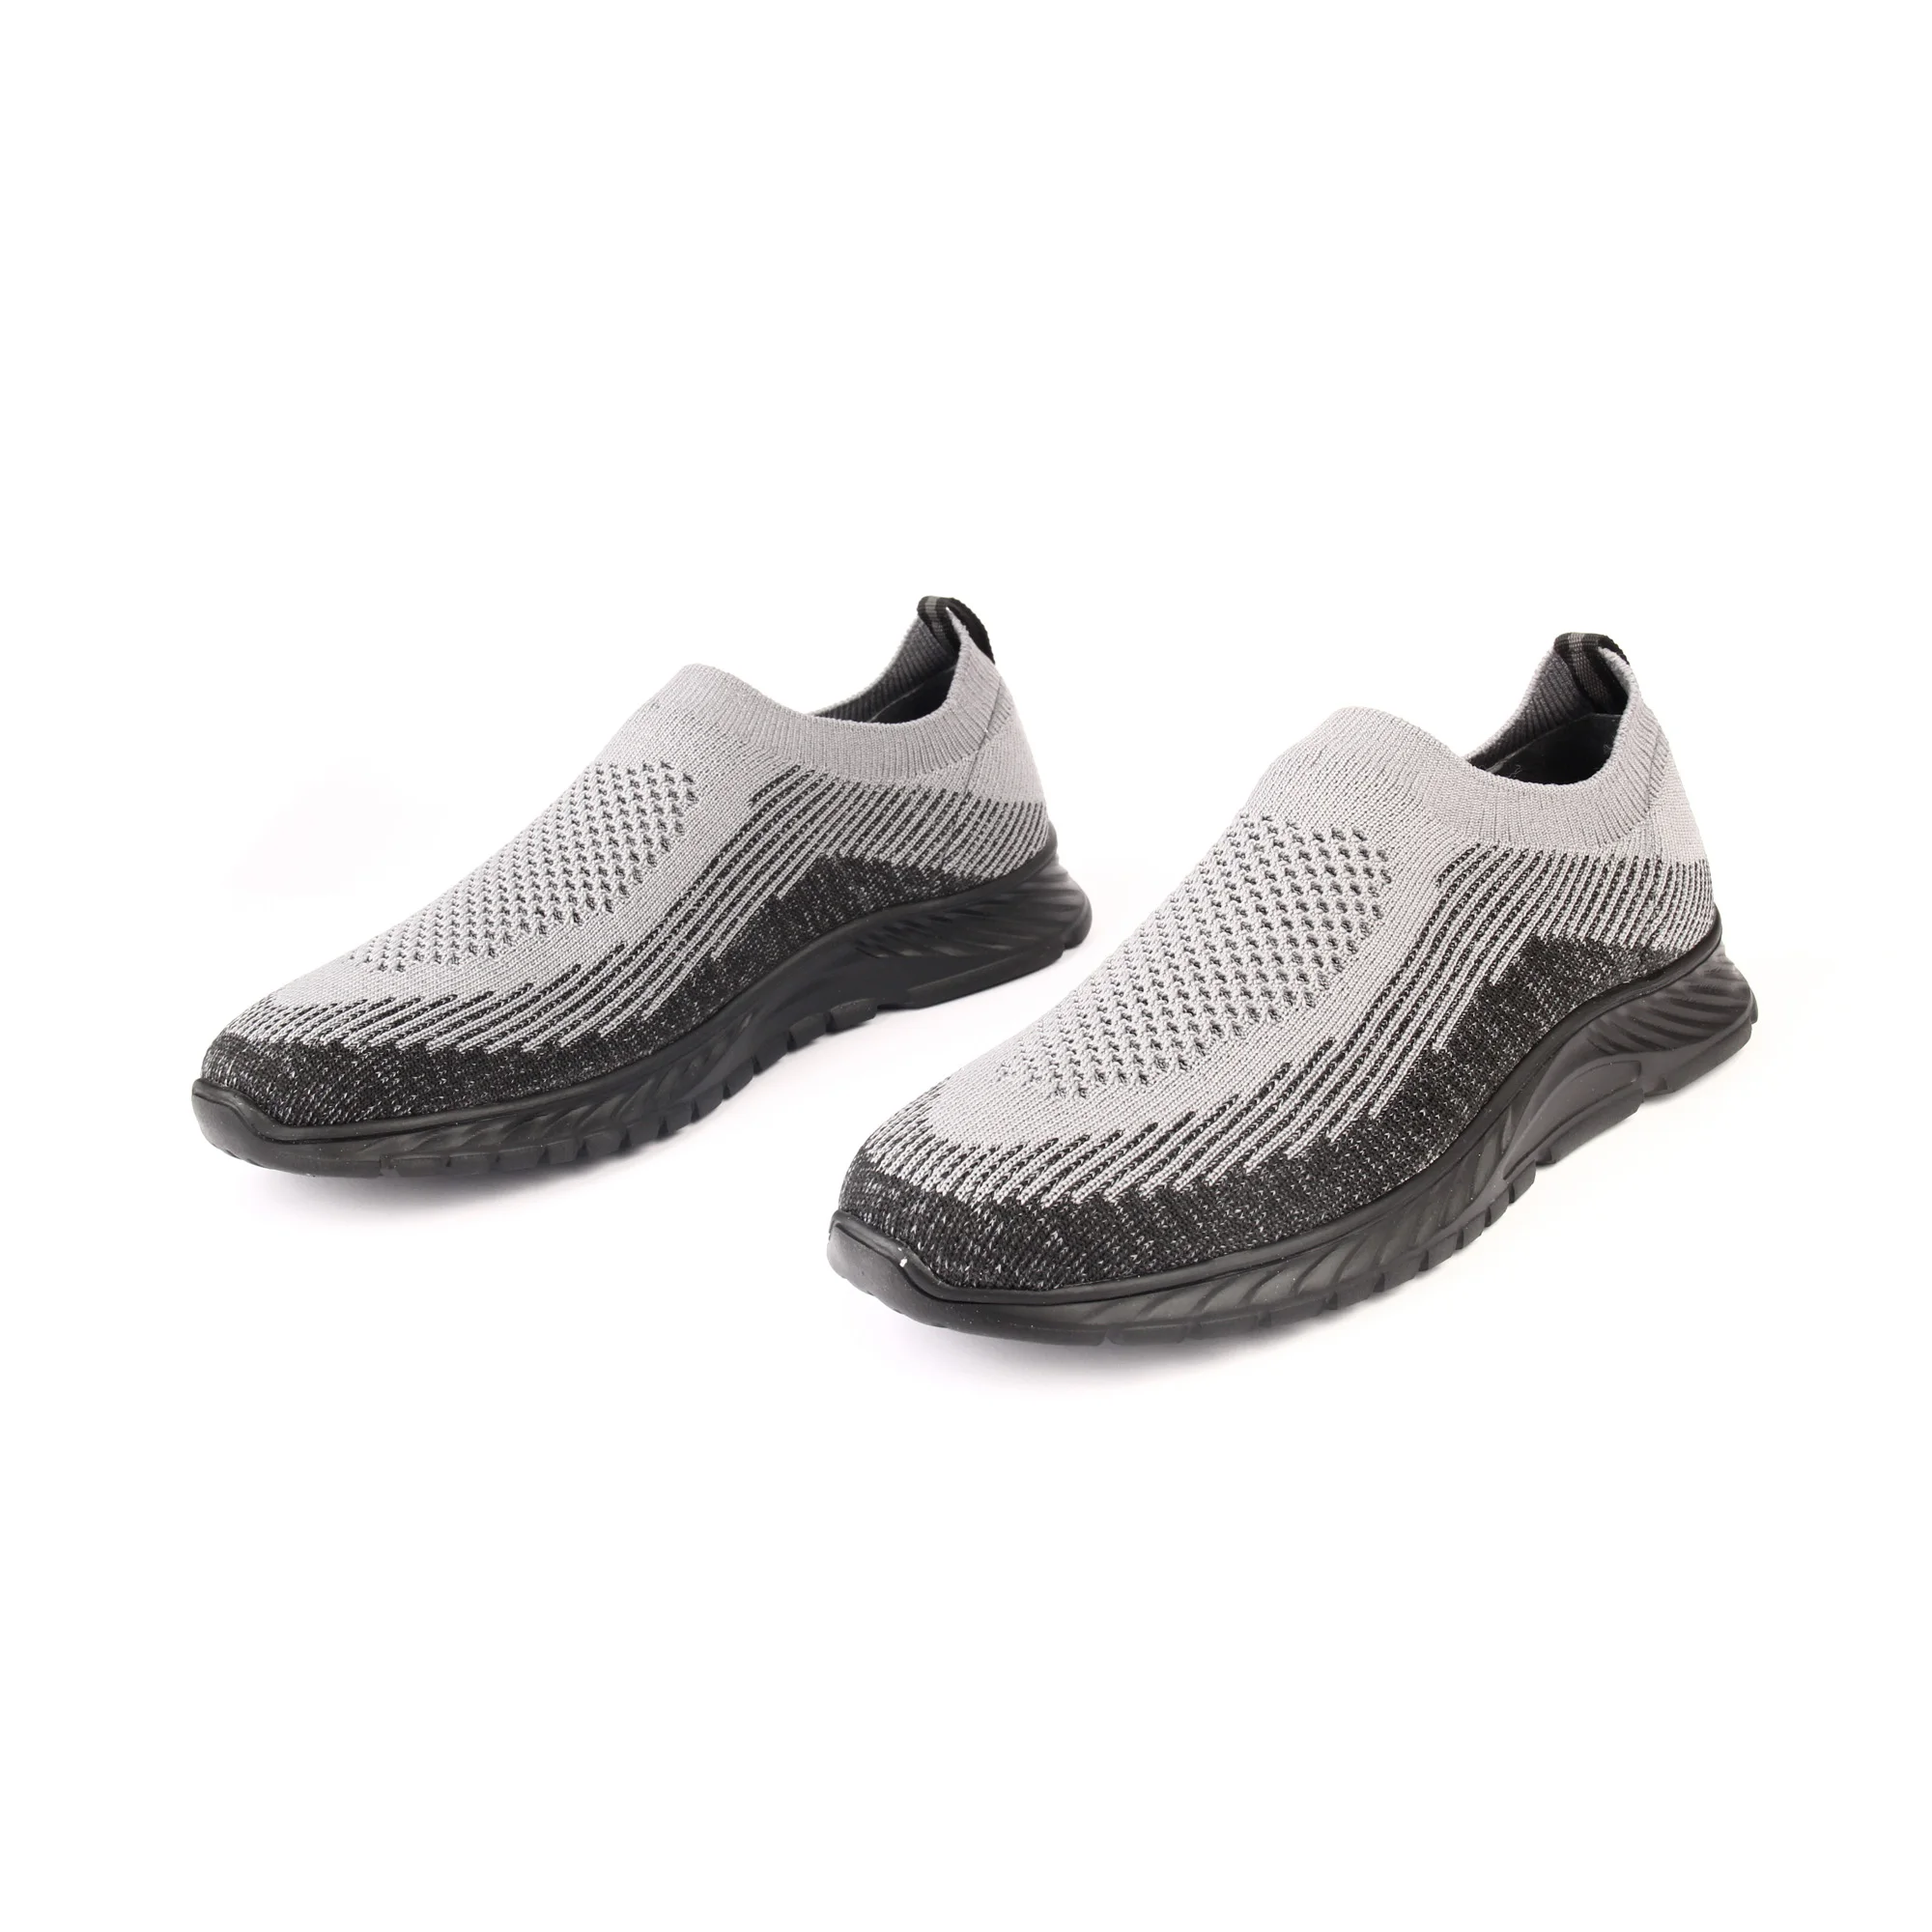 Lightweight Black Gray Slip On Laceless Sport Sneakers, Men's Comfort Casual Running Shoes, Breathable Elastic Fabric,